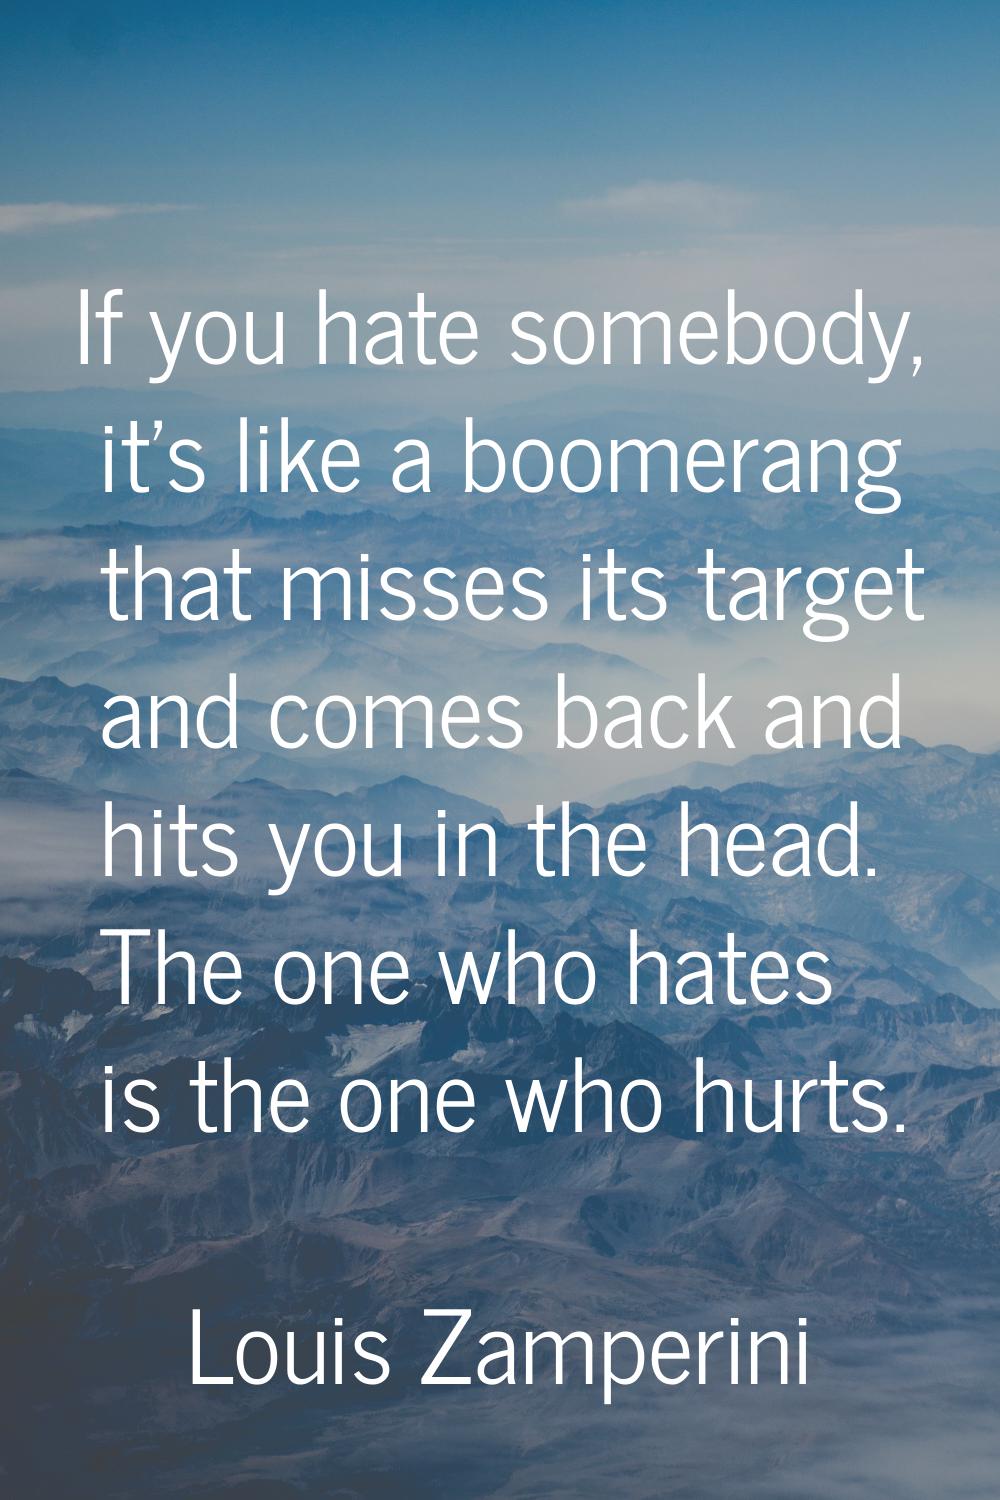 If you hate somebody, it's like a boomerang that misses its target and comes back and hits you in t